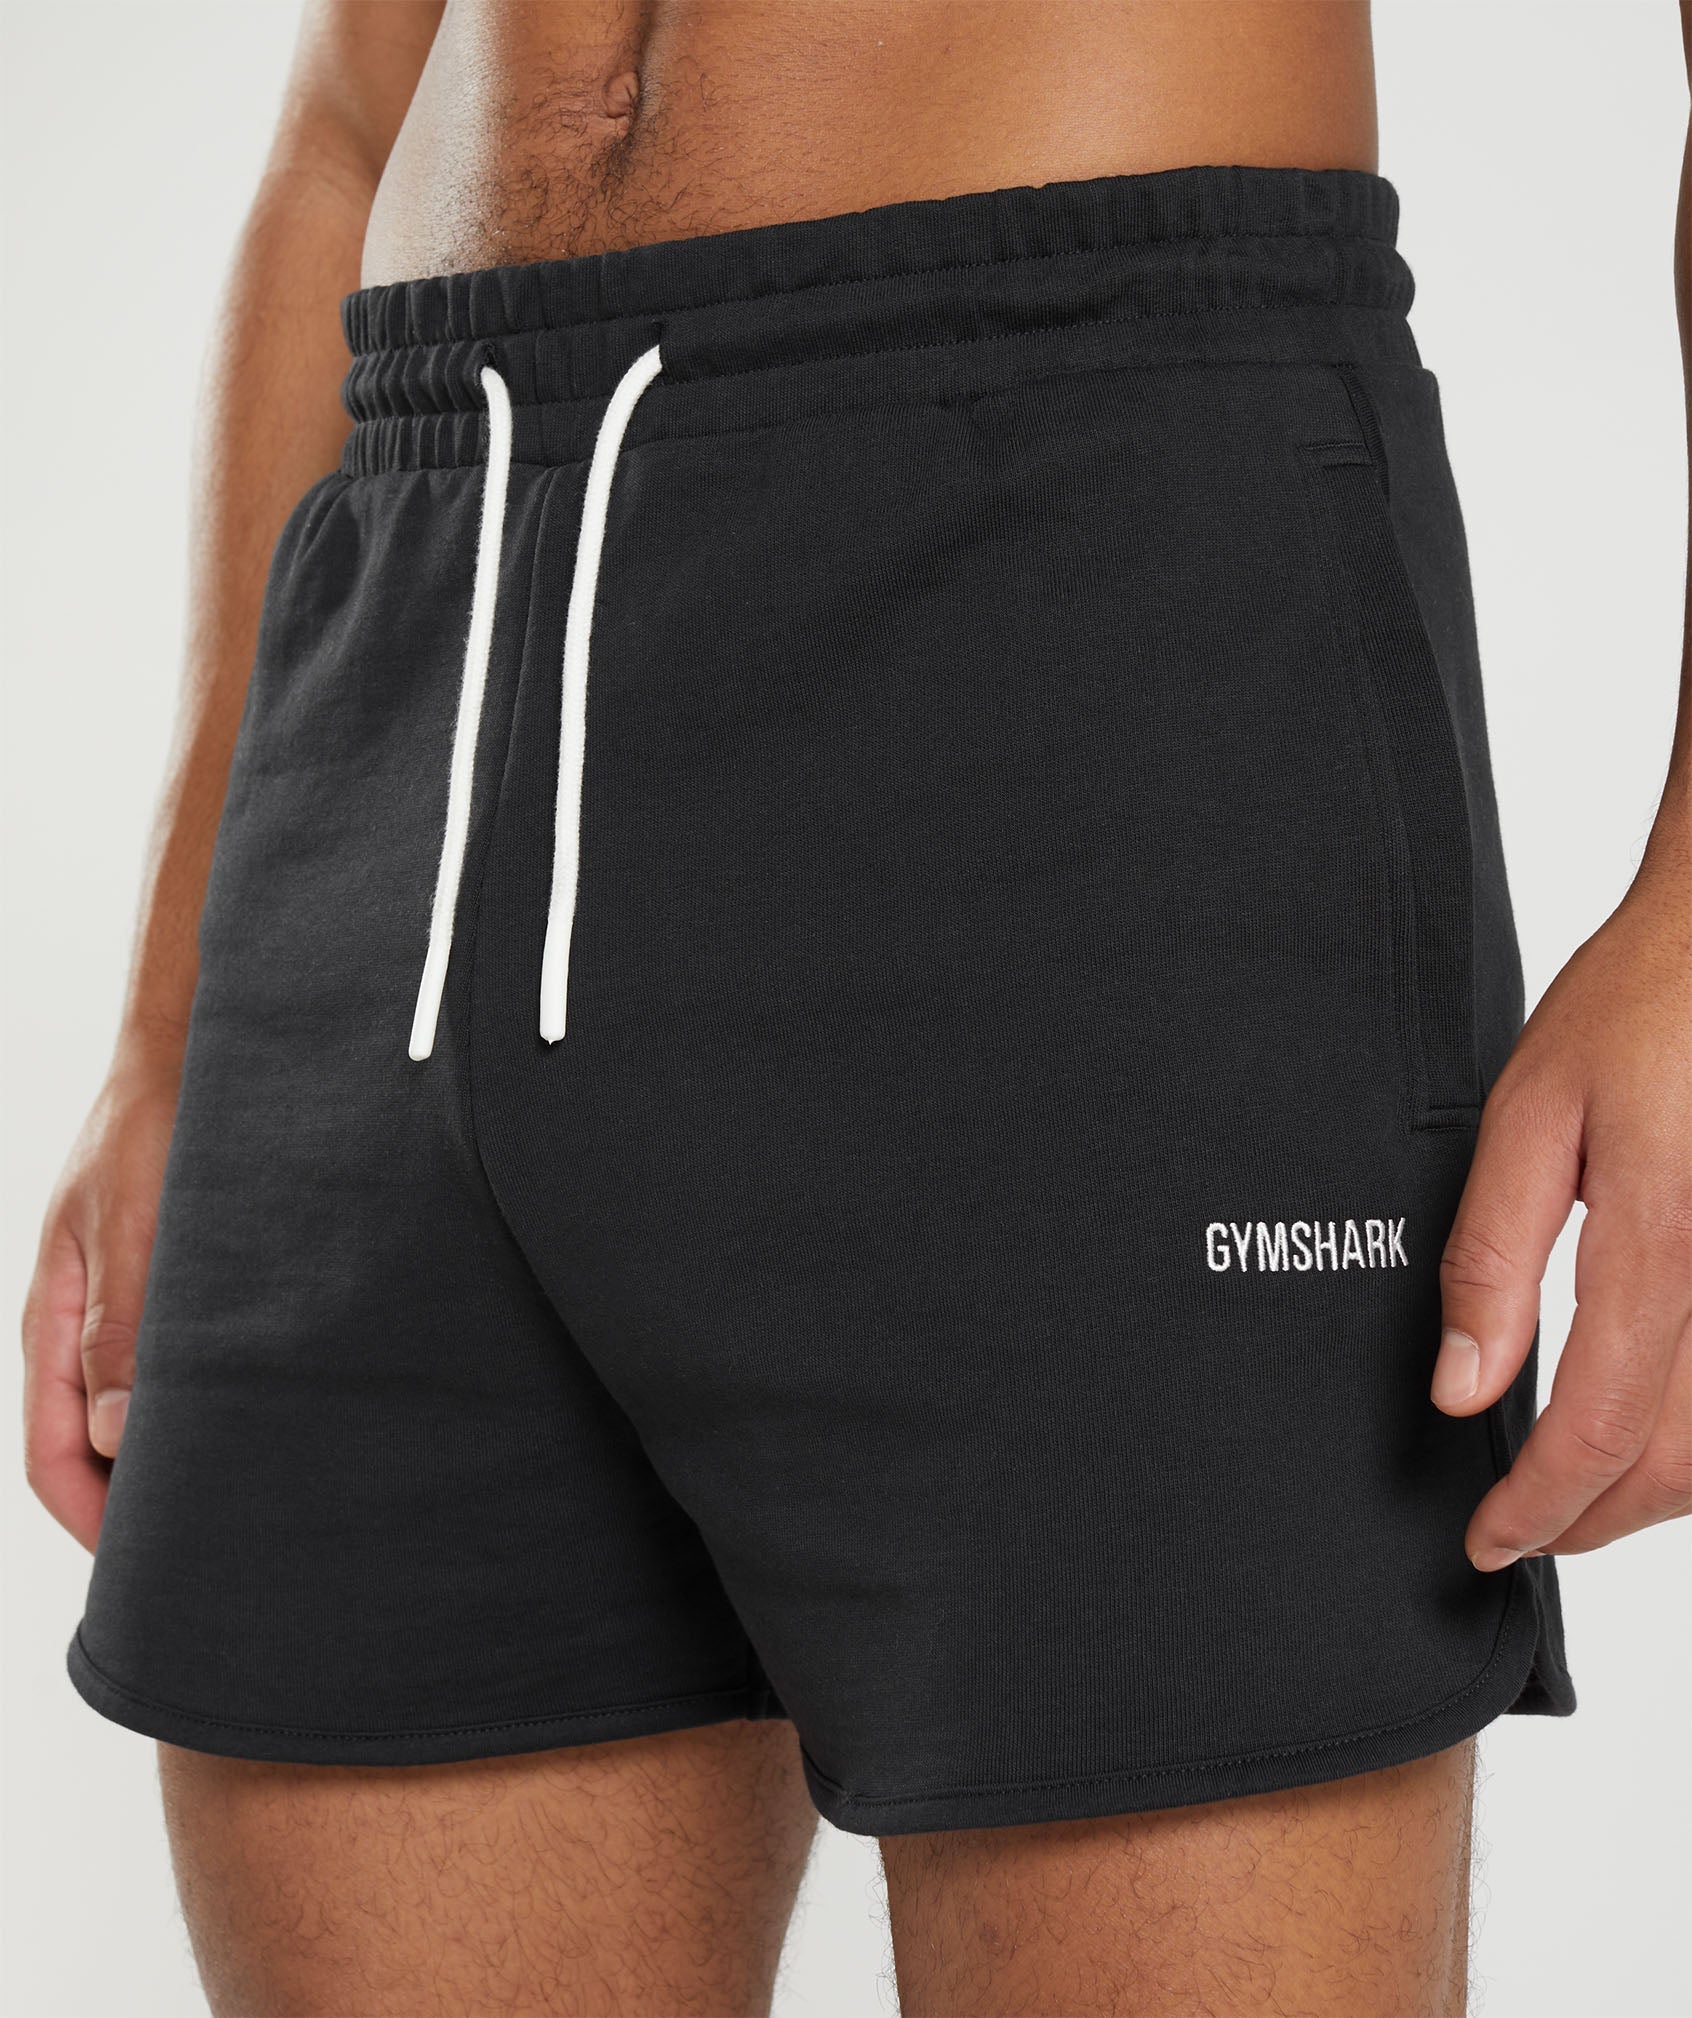 Rest Day Sweats 4'' Lounge Shorts in Black - view 9